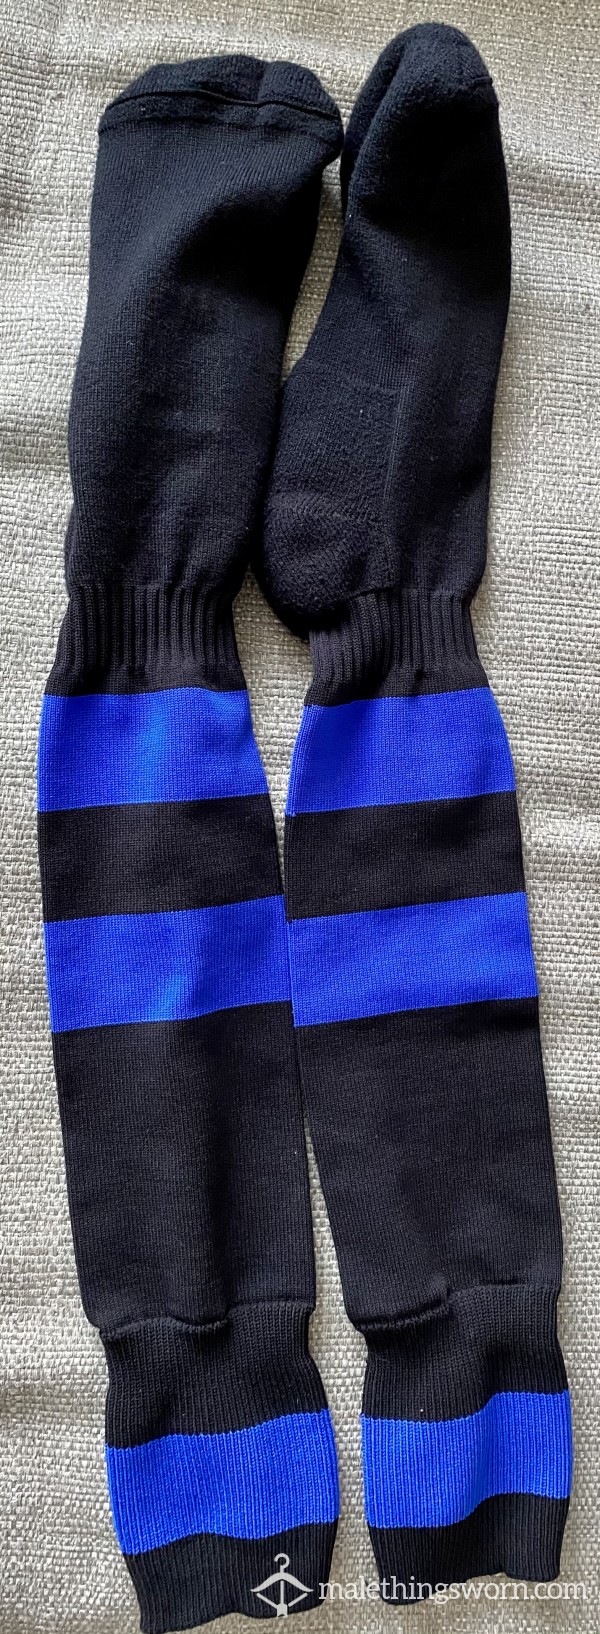 Rugby Socks Ready For Customising For Your Pleasure